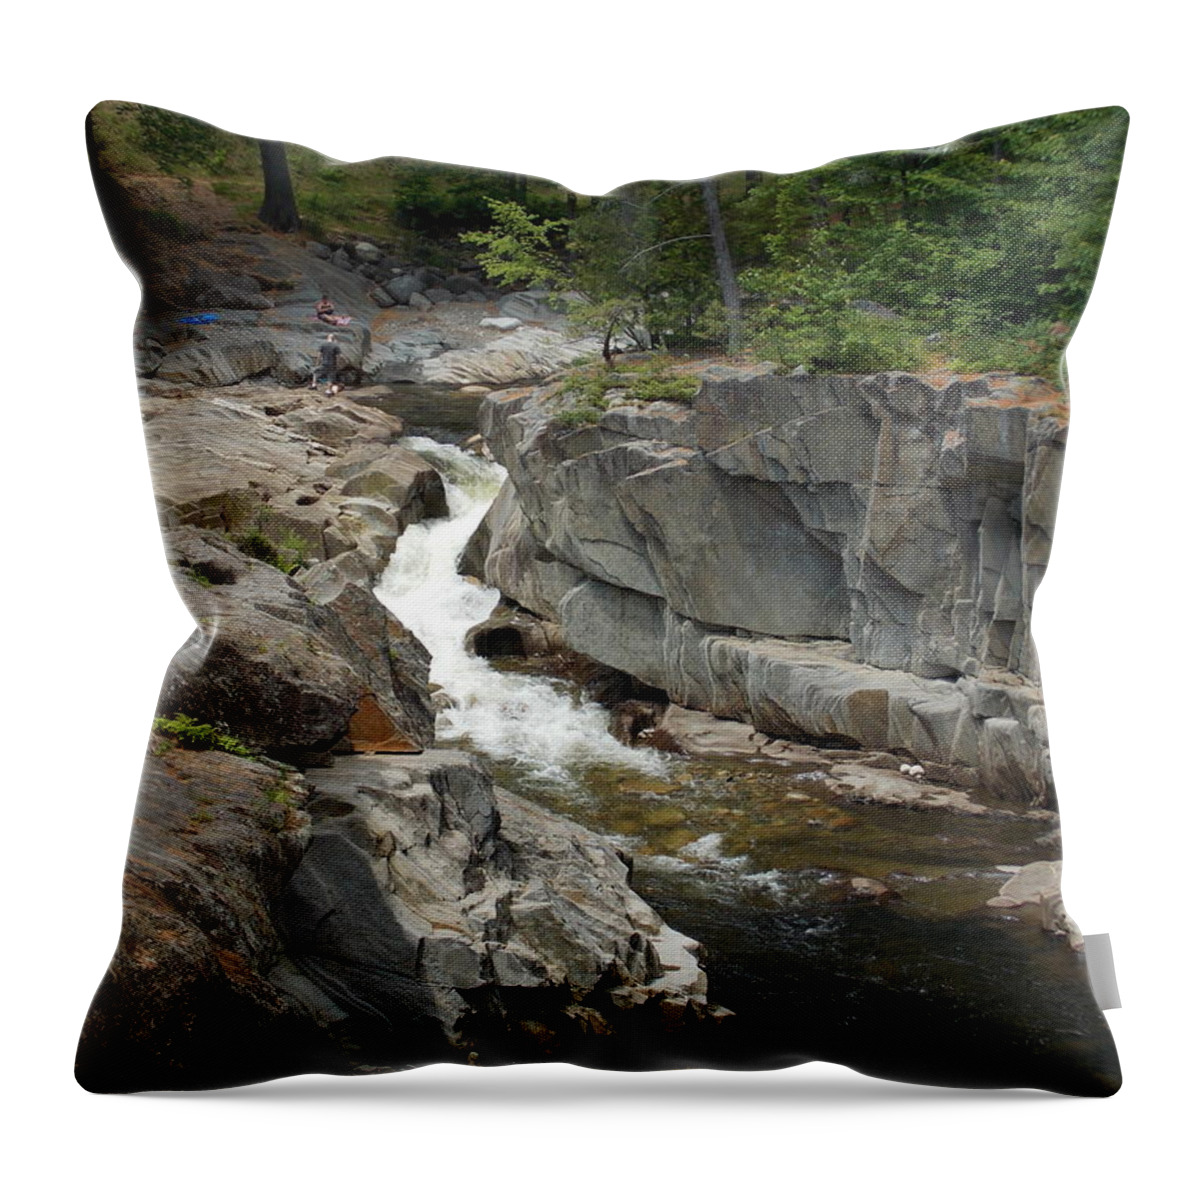 Waterfalls Throw Pillow featuring the photograph Coos Canyon in Maine by Catherine Gagne